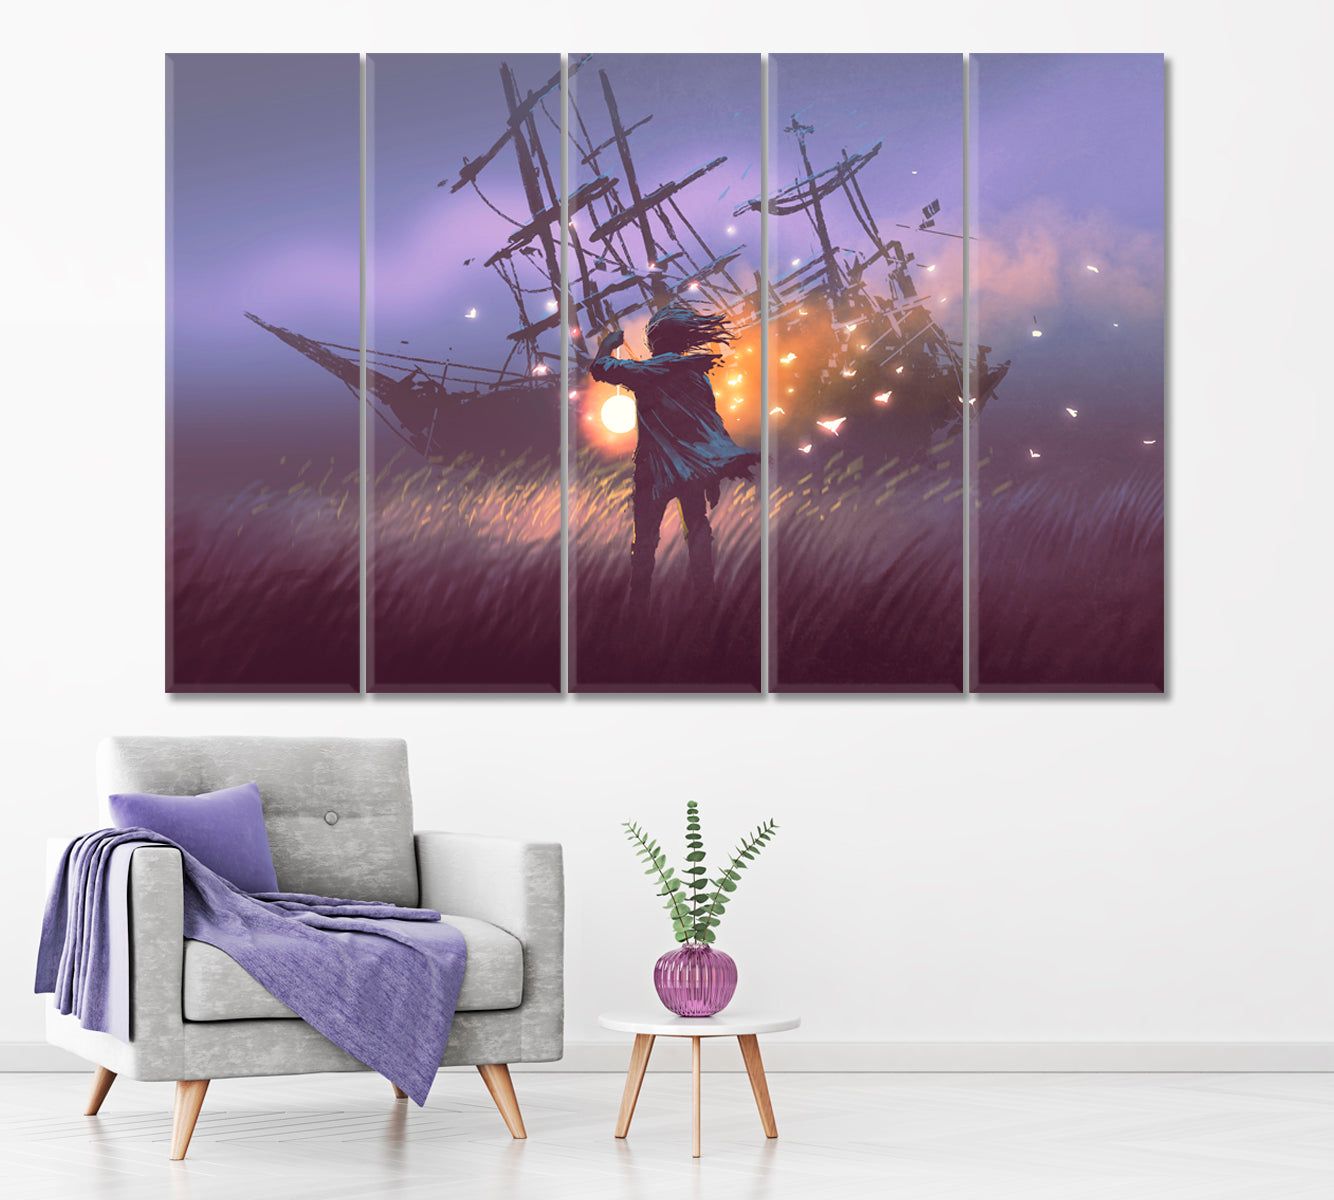 Man with Lantern Found Magic Ship in Field Canvas Print ArtLexy 5 Panels 36"x24" inches 